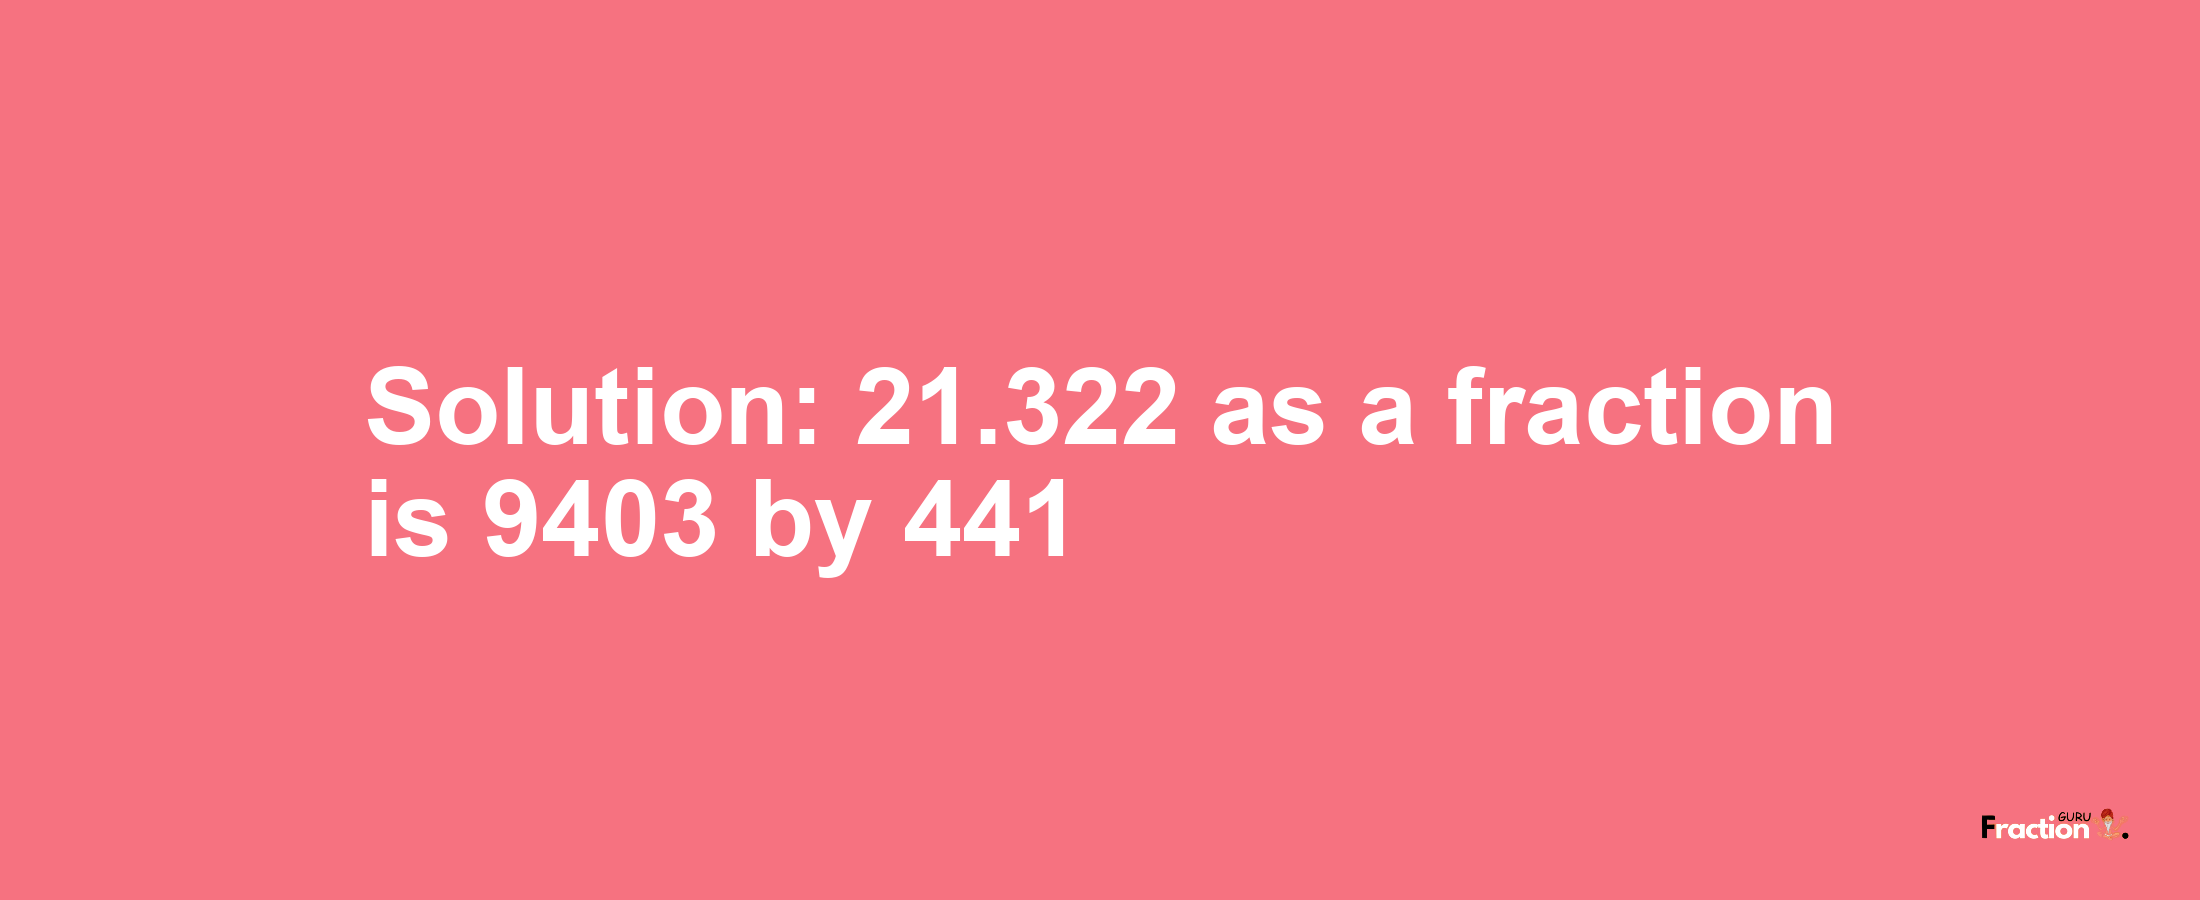 Solution:21.322 as a fraction is 9403/441